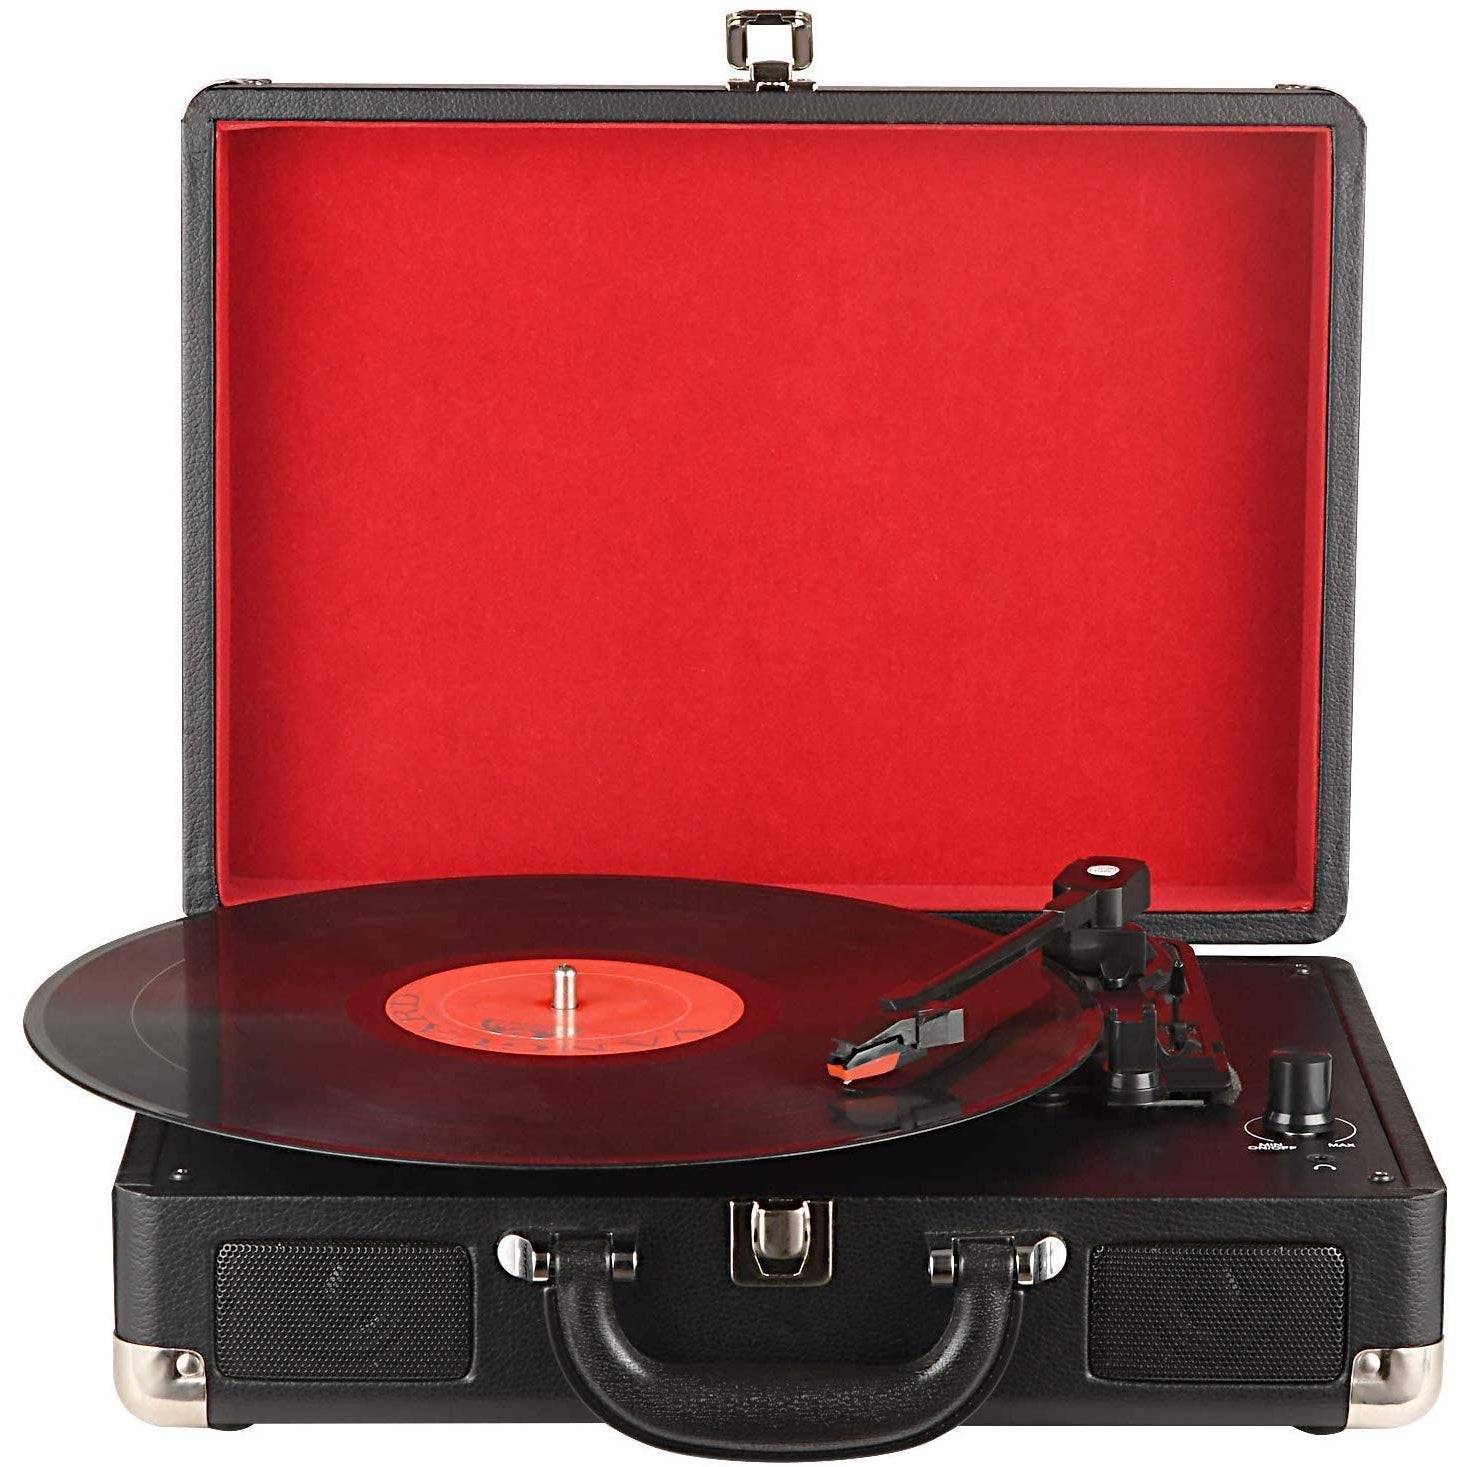 Digitnow Three Speeds Turntable Retro Record Player with Built-in Stereo Speakers, Supports USB, Headphone Jack ,Suitcase Design